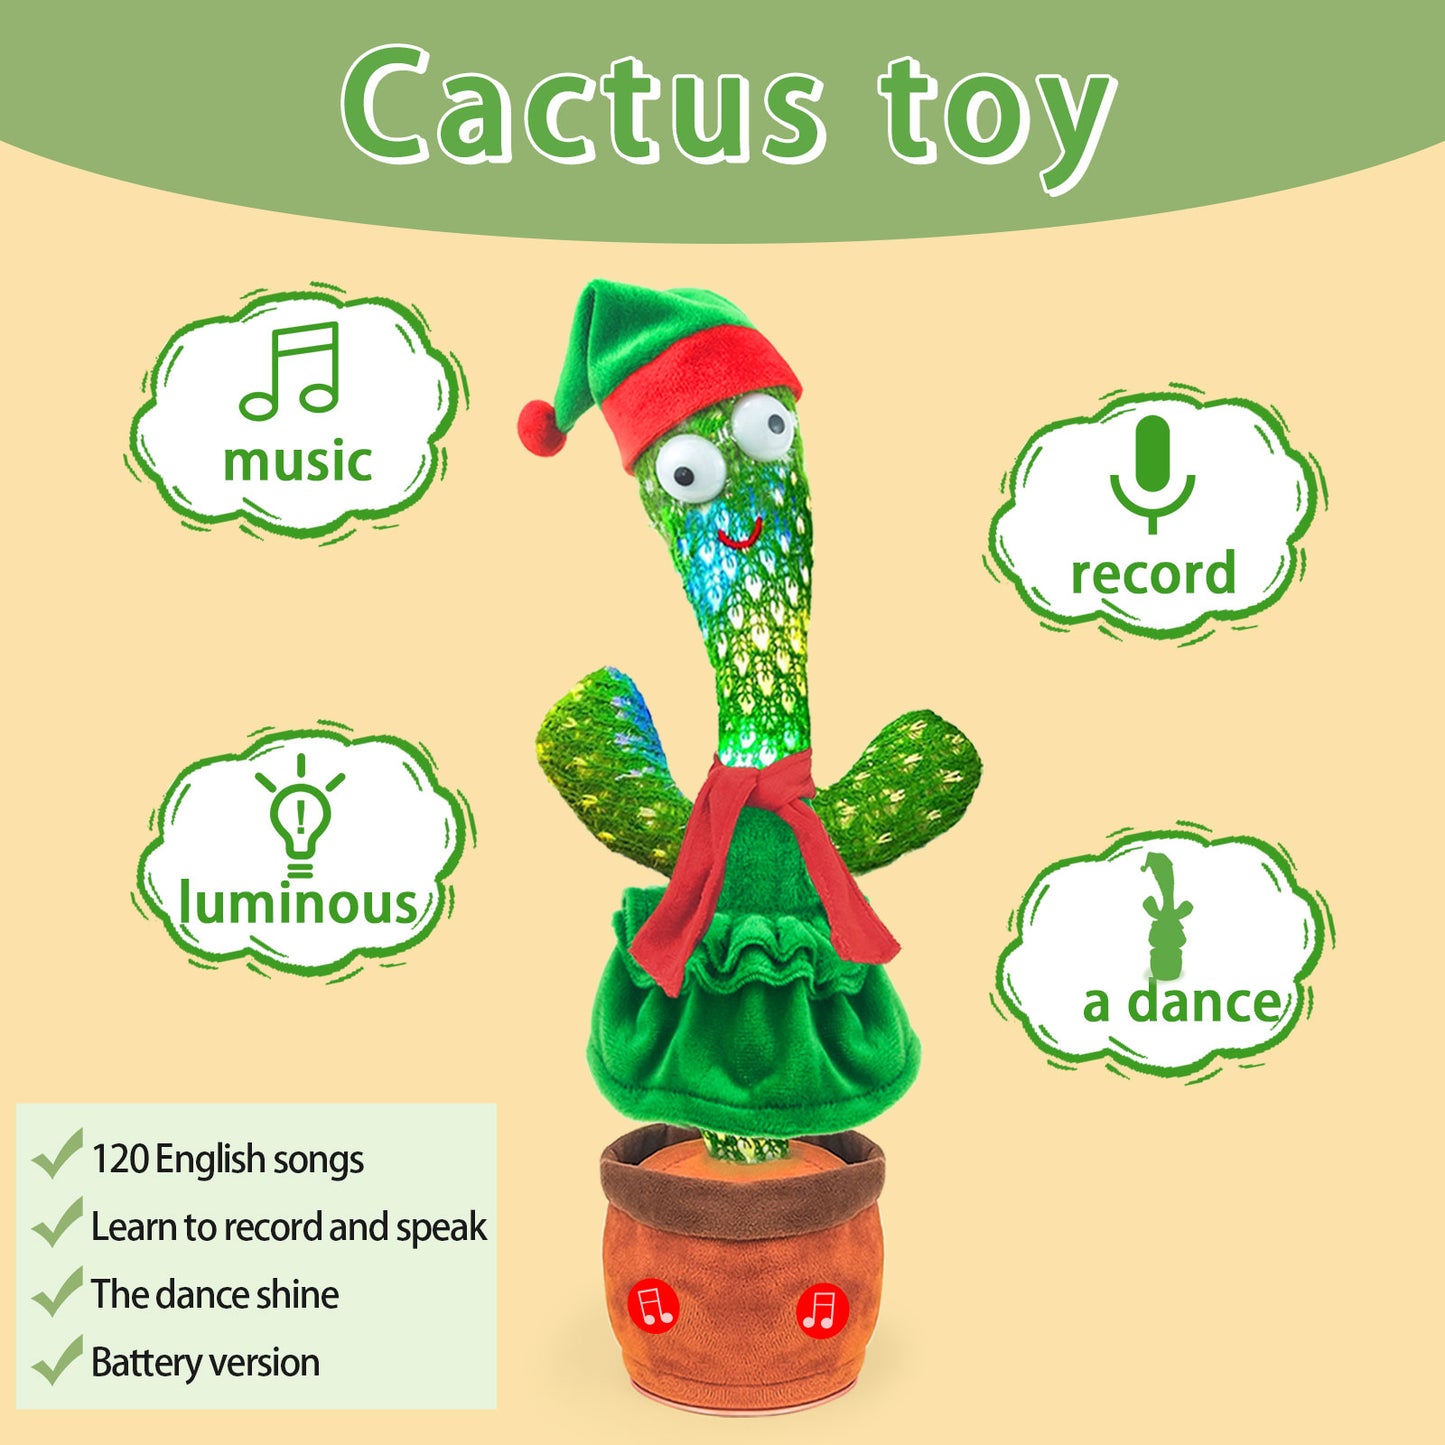 Dancing Talking Cactus Baby Toy,Dancing Cactus Mimicking Toy Repeats What You Say,Imitate Speech Sing English Songs,Christmas Birthday Gifts Party Favors for Kids Boys Girls